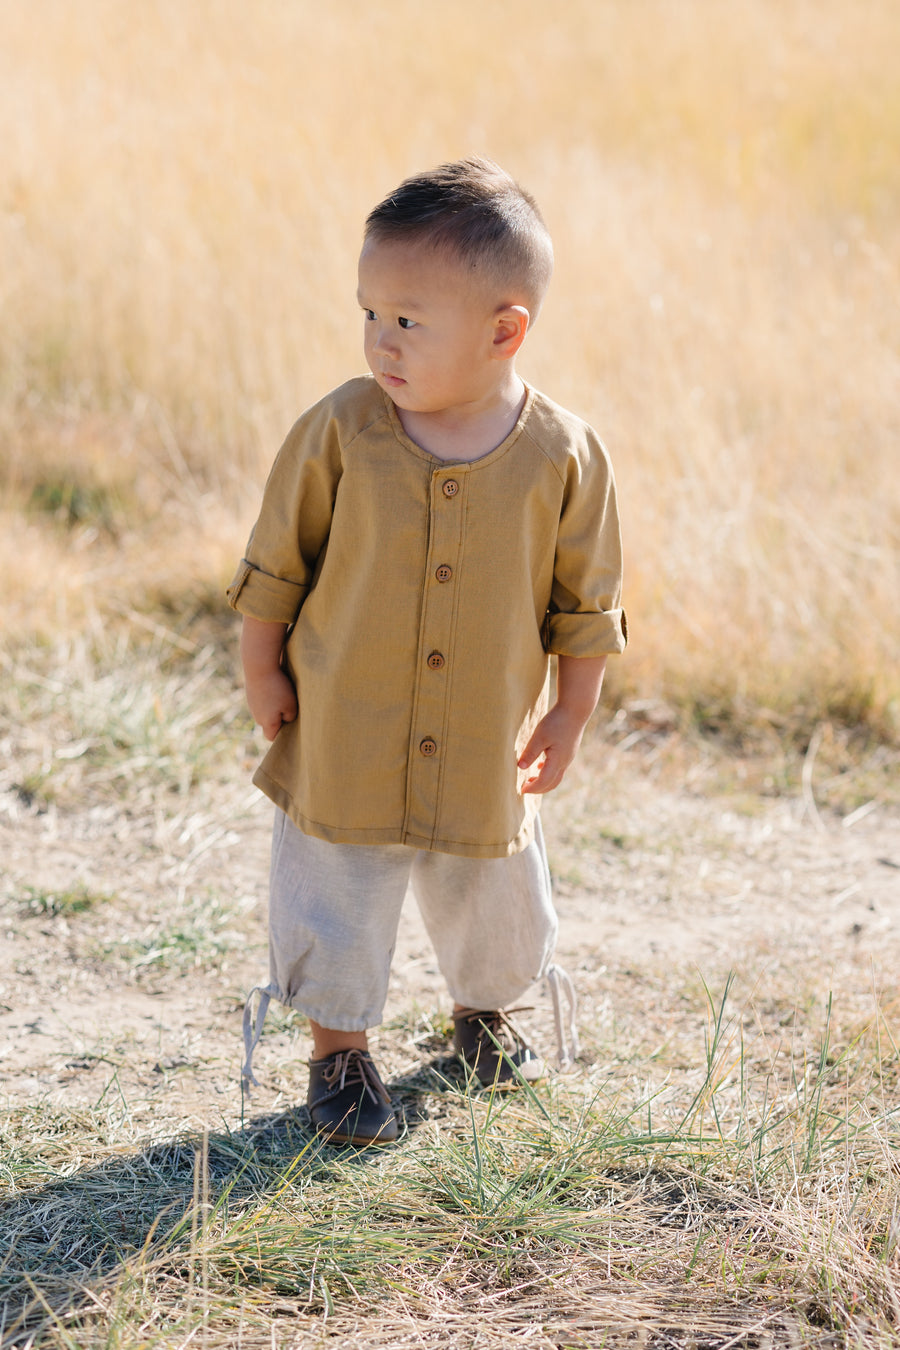 Dune Tunic with Terrain Pants and Oxford shoes